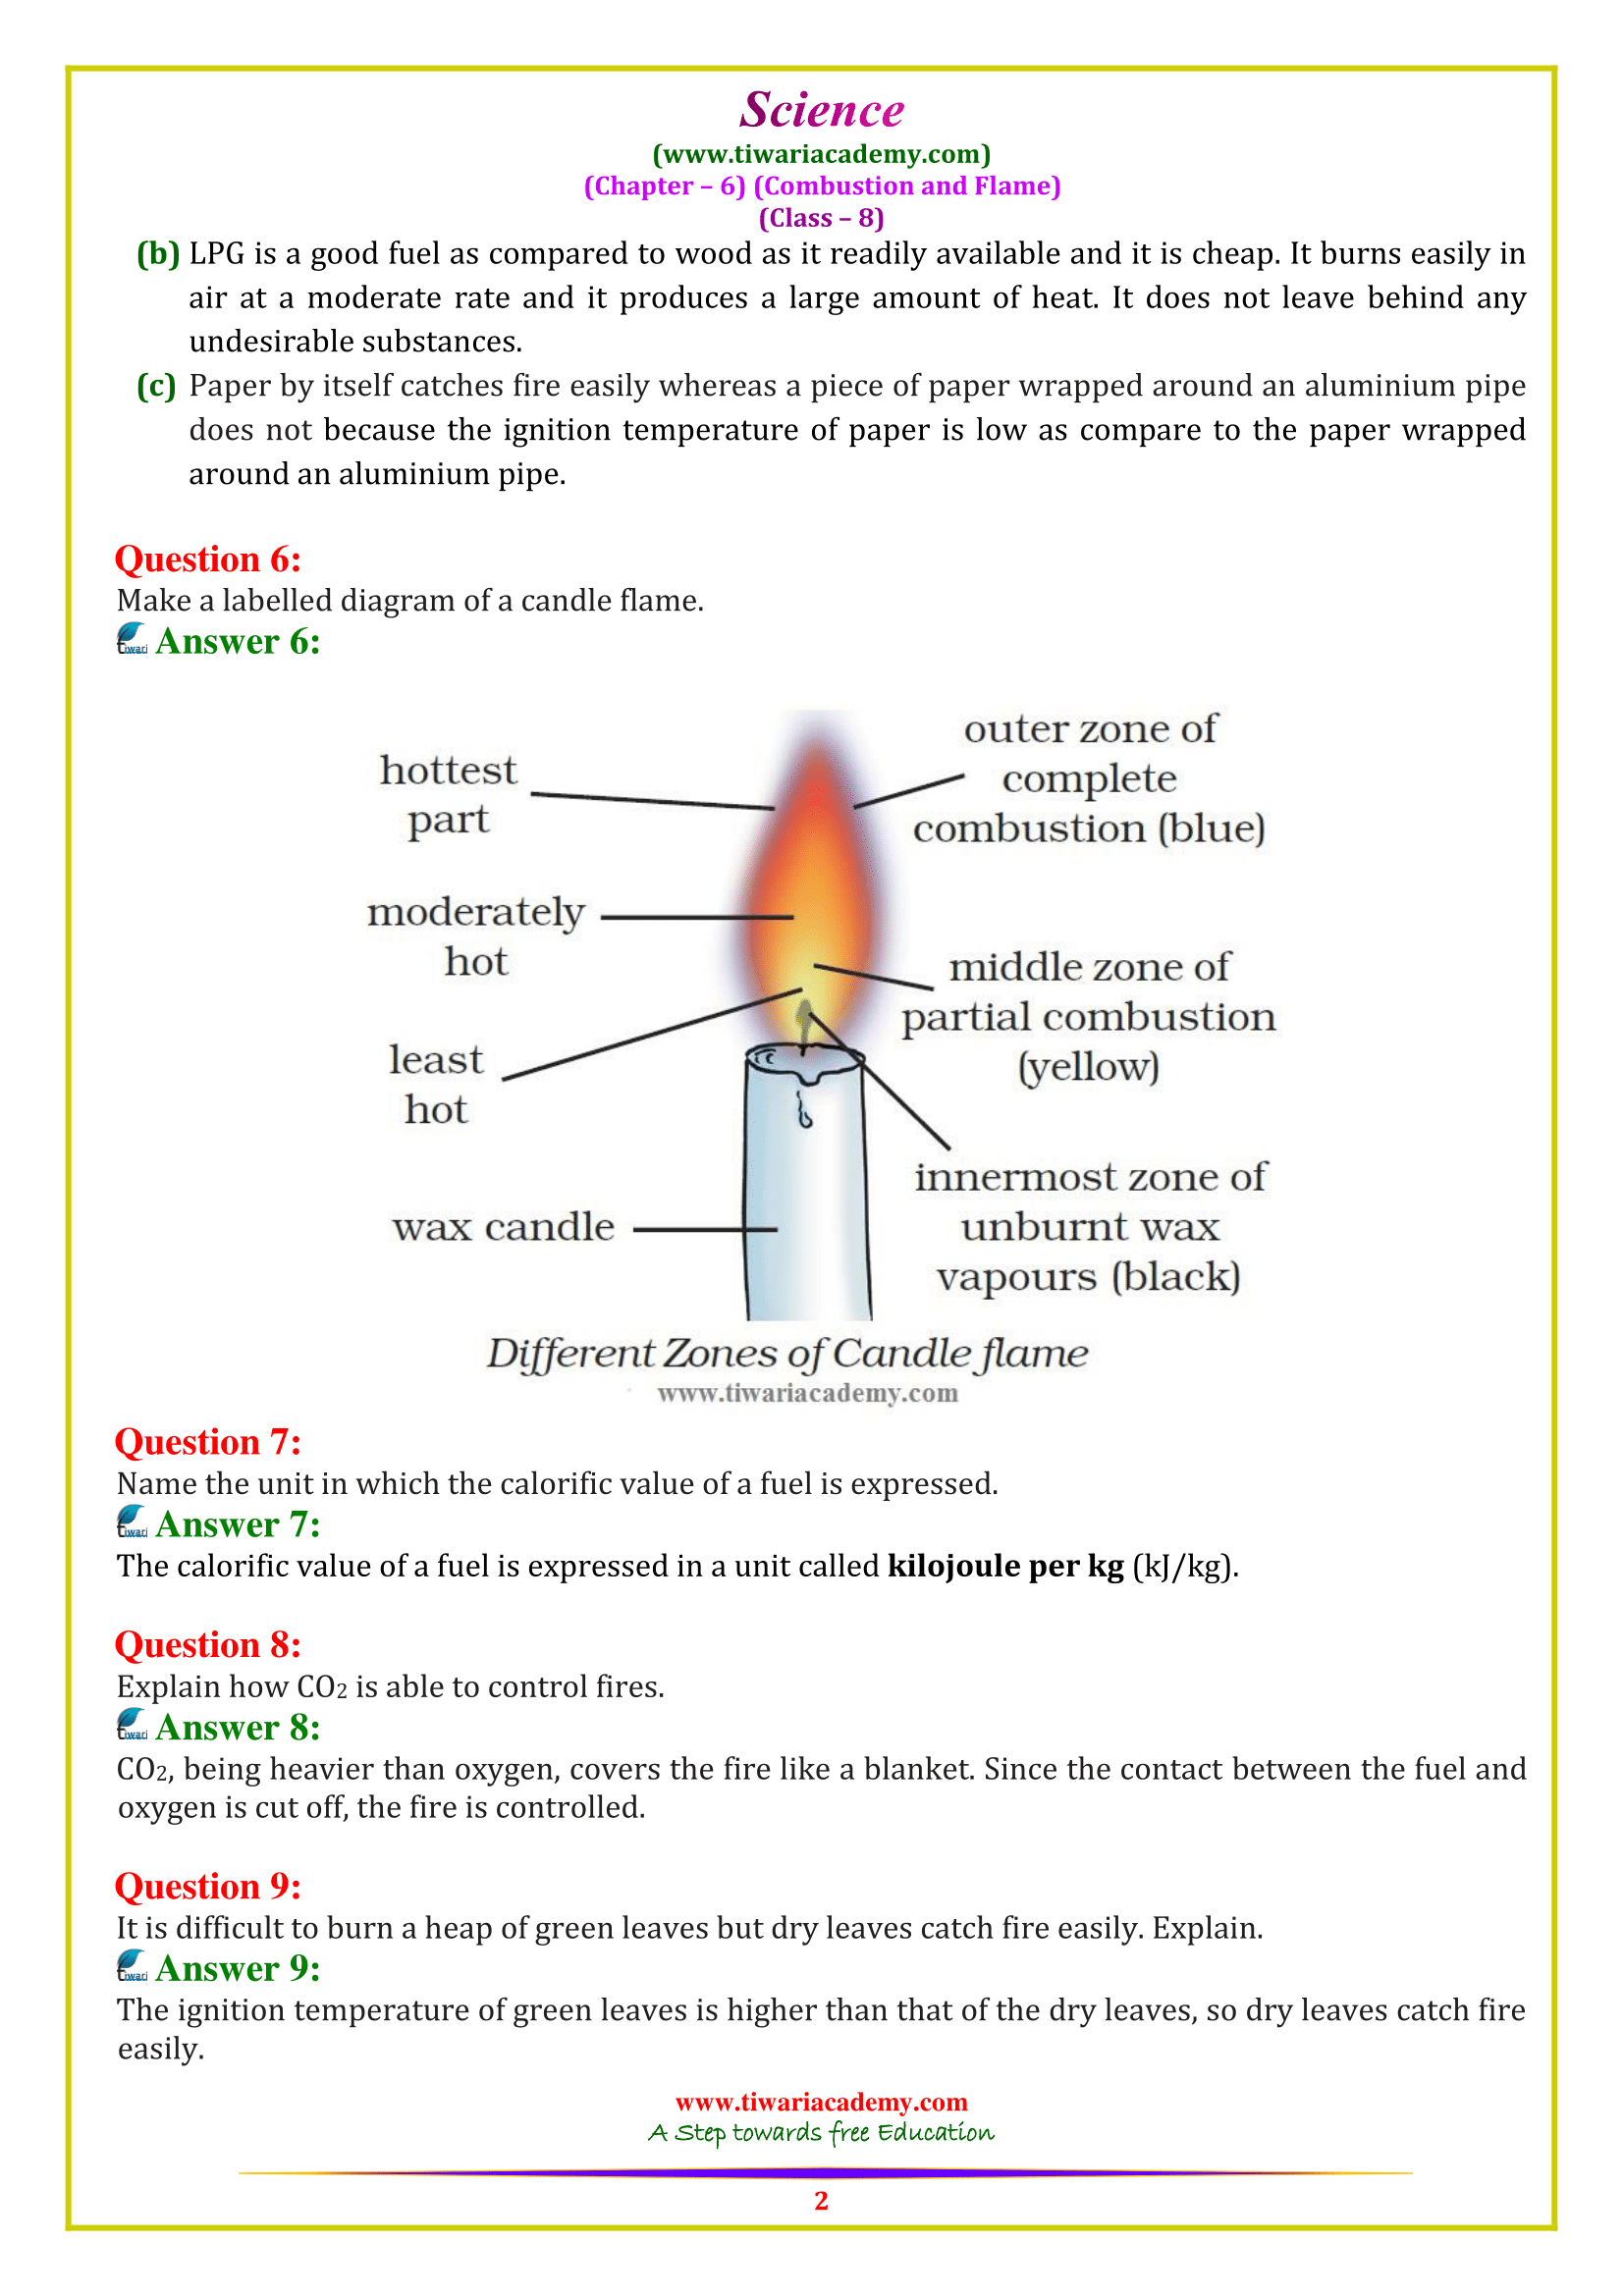 NCERT Solutions for Class 8 Science Chapter 6 in PDF form